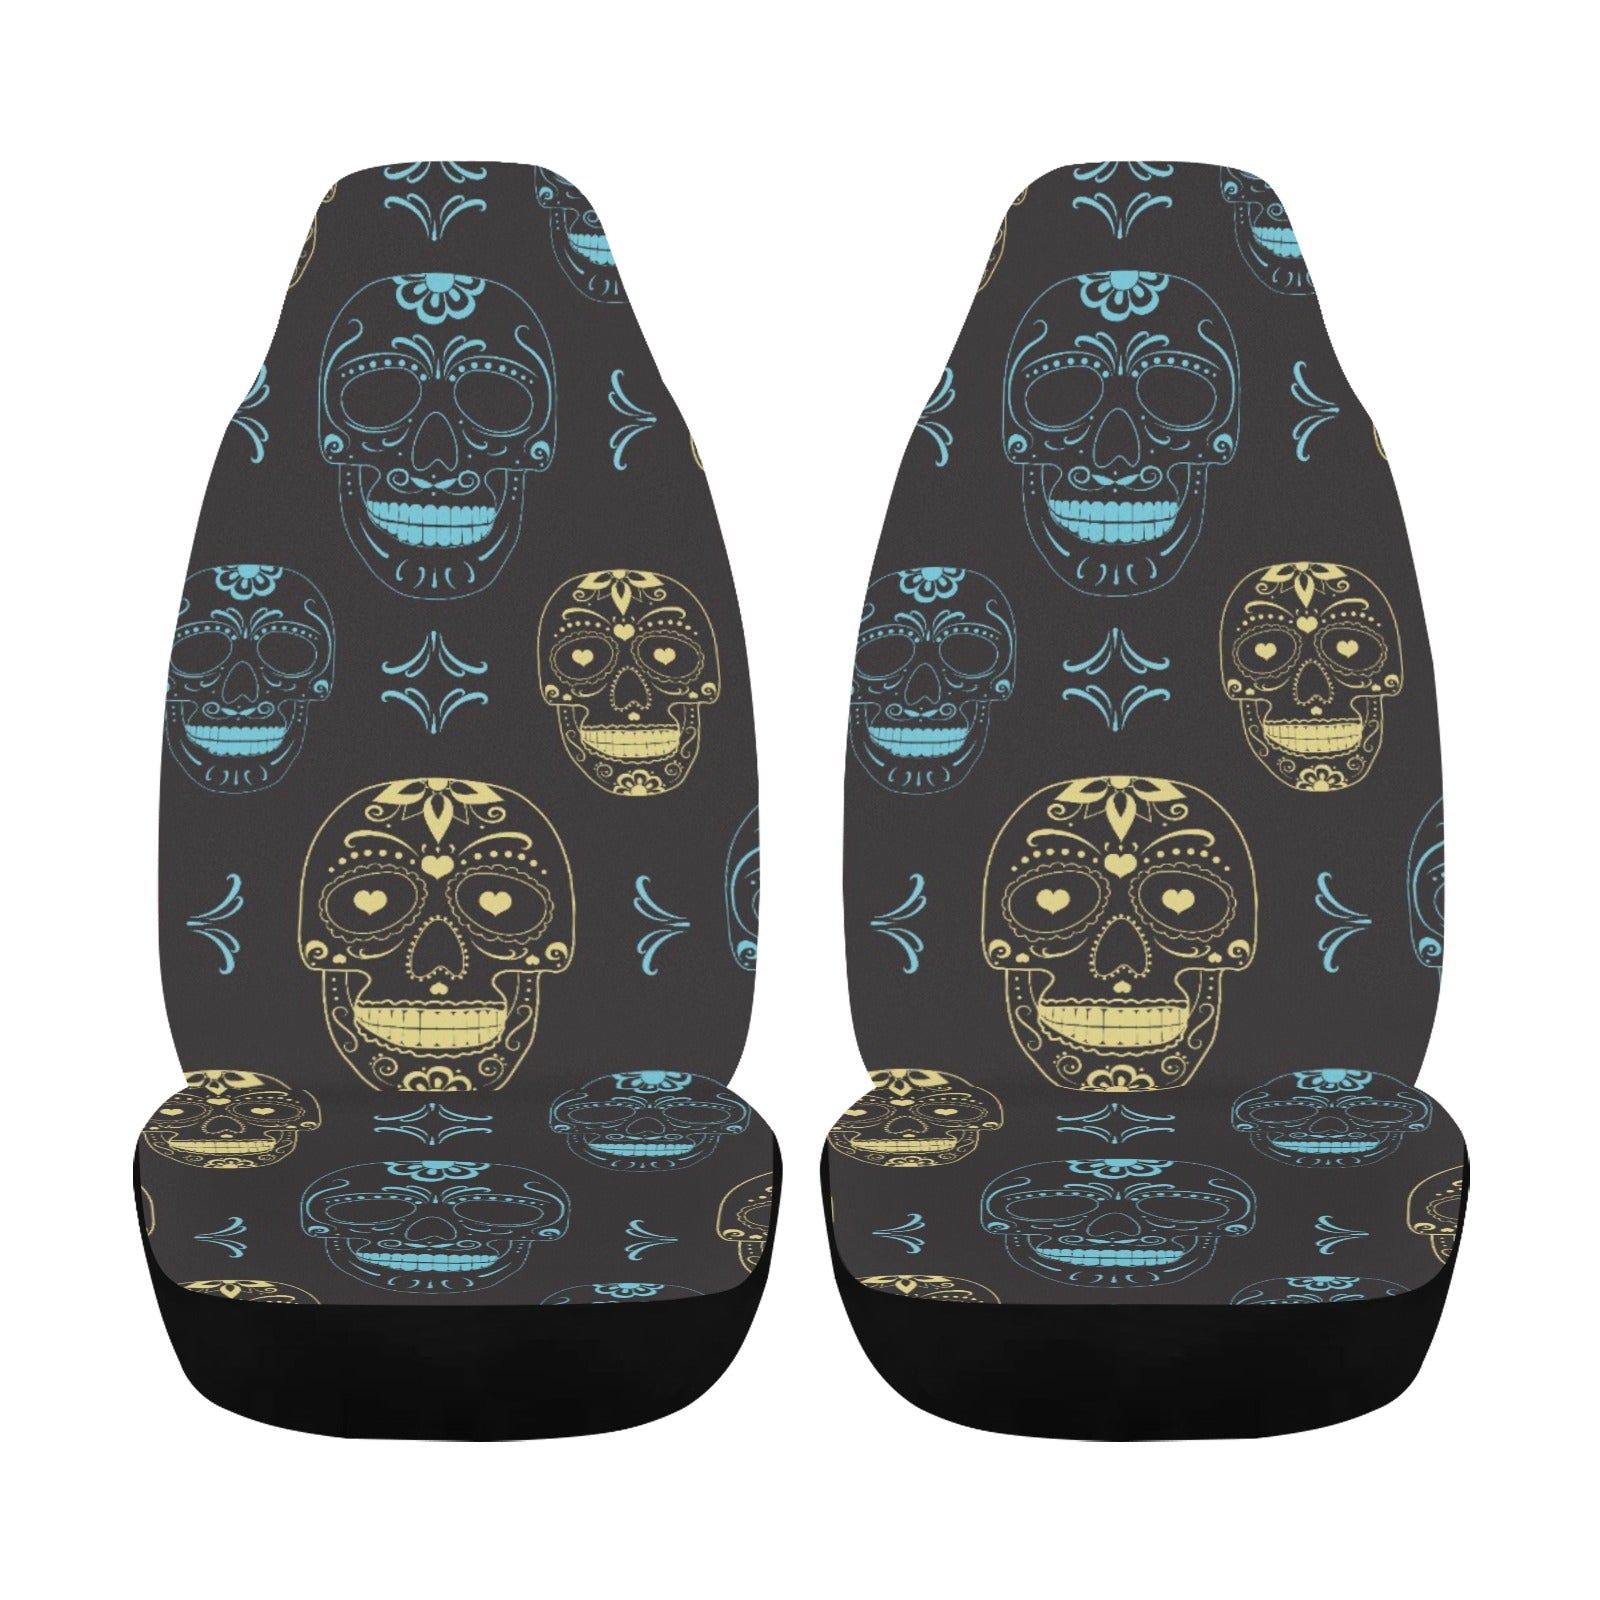 Blue & Gold Skulls Car Seat Cover Airbag Compatible Set of 2